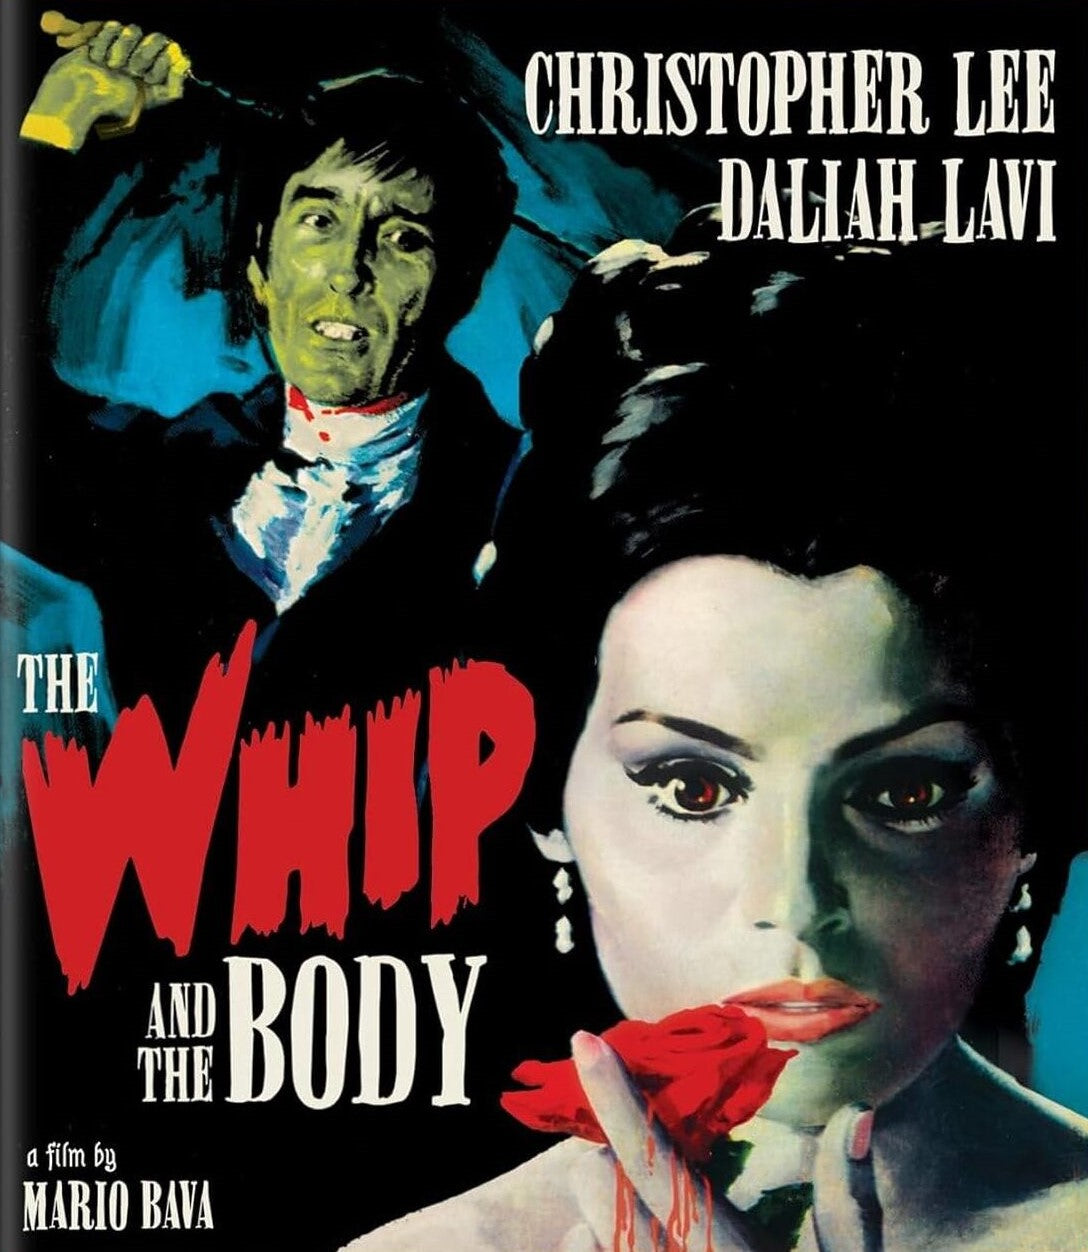 THE WHIP AND THE BODY BLU-RAY